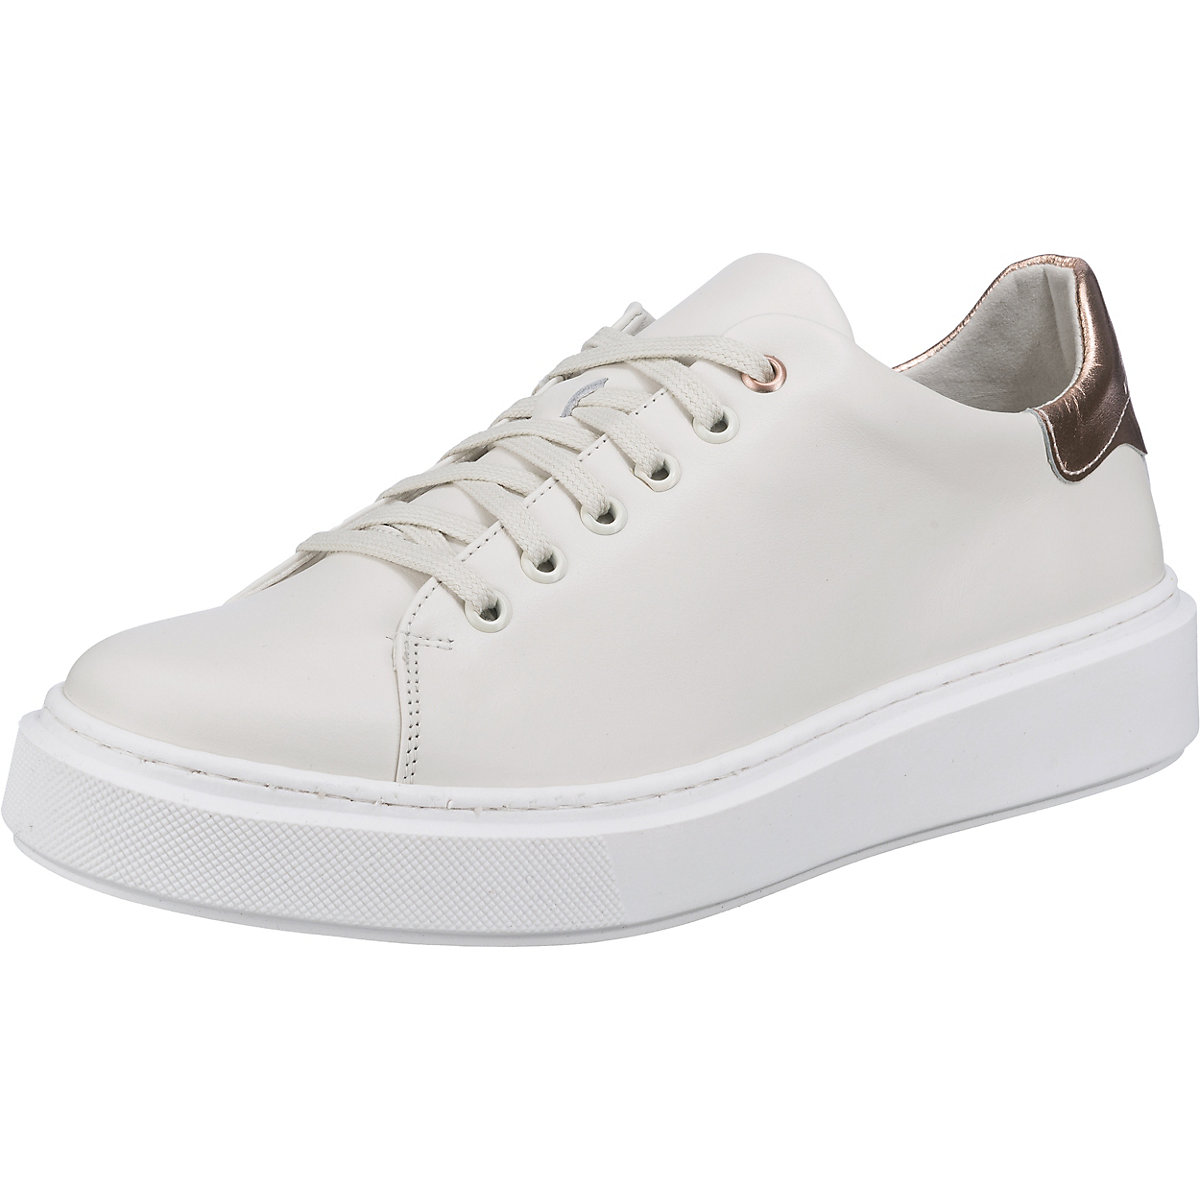 Paul Vesterbro Fashion Comfort Leder Sneakers Low offwhite